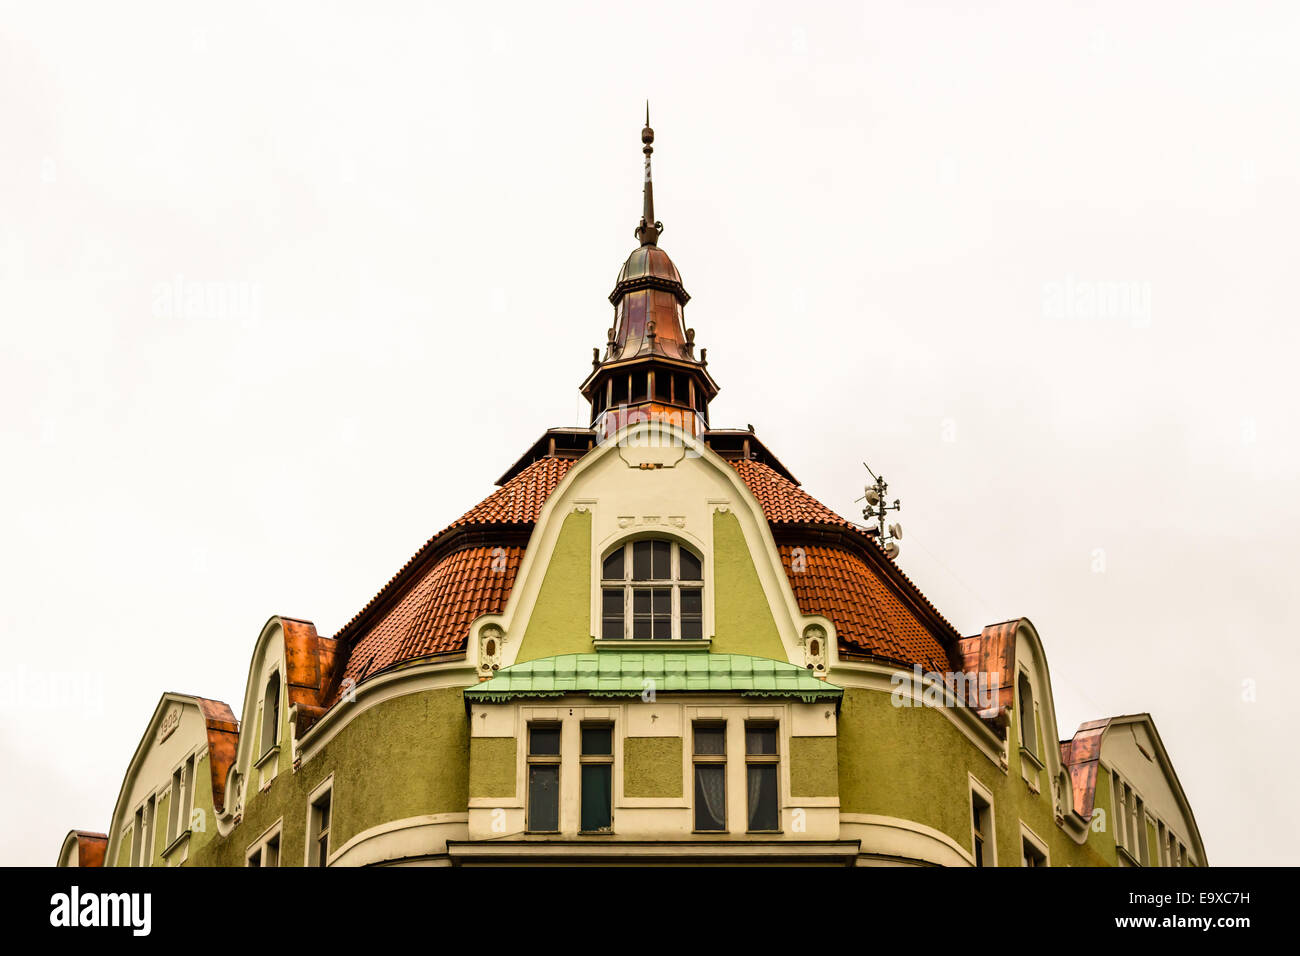 Buildings  and houses in the historical center of Prague: green walls, red rooftops, narrow windows. Stock Photo